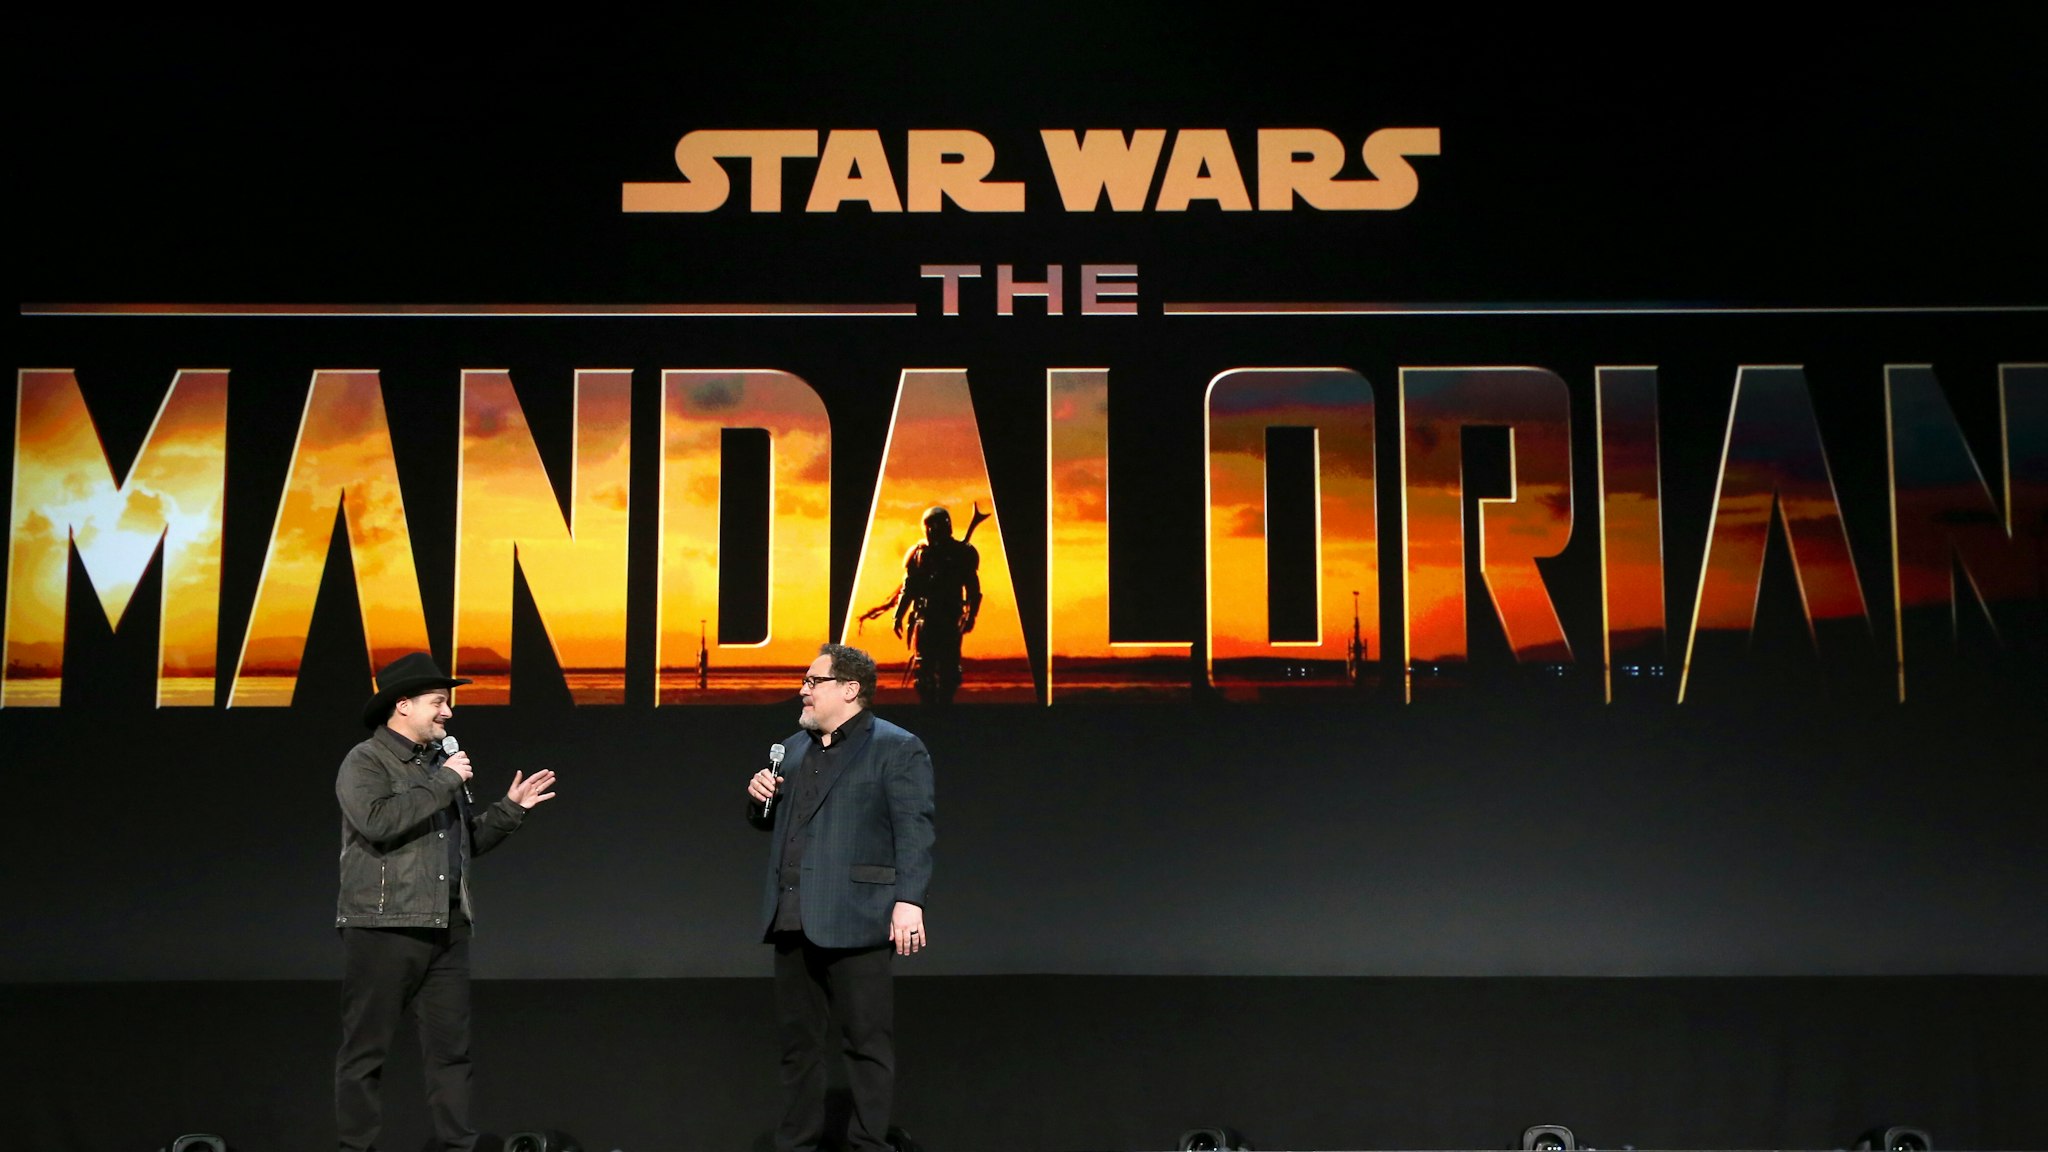 ANAHEIM, CALIFORNIA - AUGUST 23: Executive producer/writers Dave Filoni and Jon Favreau of 'The Mandalorian' took part today in the Disney+ Showcase at Disney’s D23 EXPO 2019 in Anaheim, Calif. 'The Mandalorian' will stream exclusively on Disney+, which launches November 12. (Photo by Jesse Grant/Getty Images for Disney)